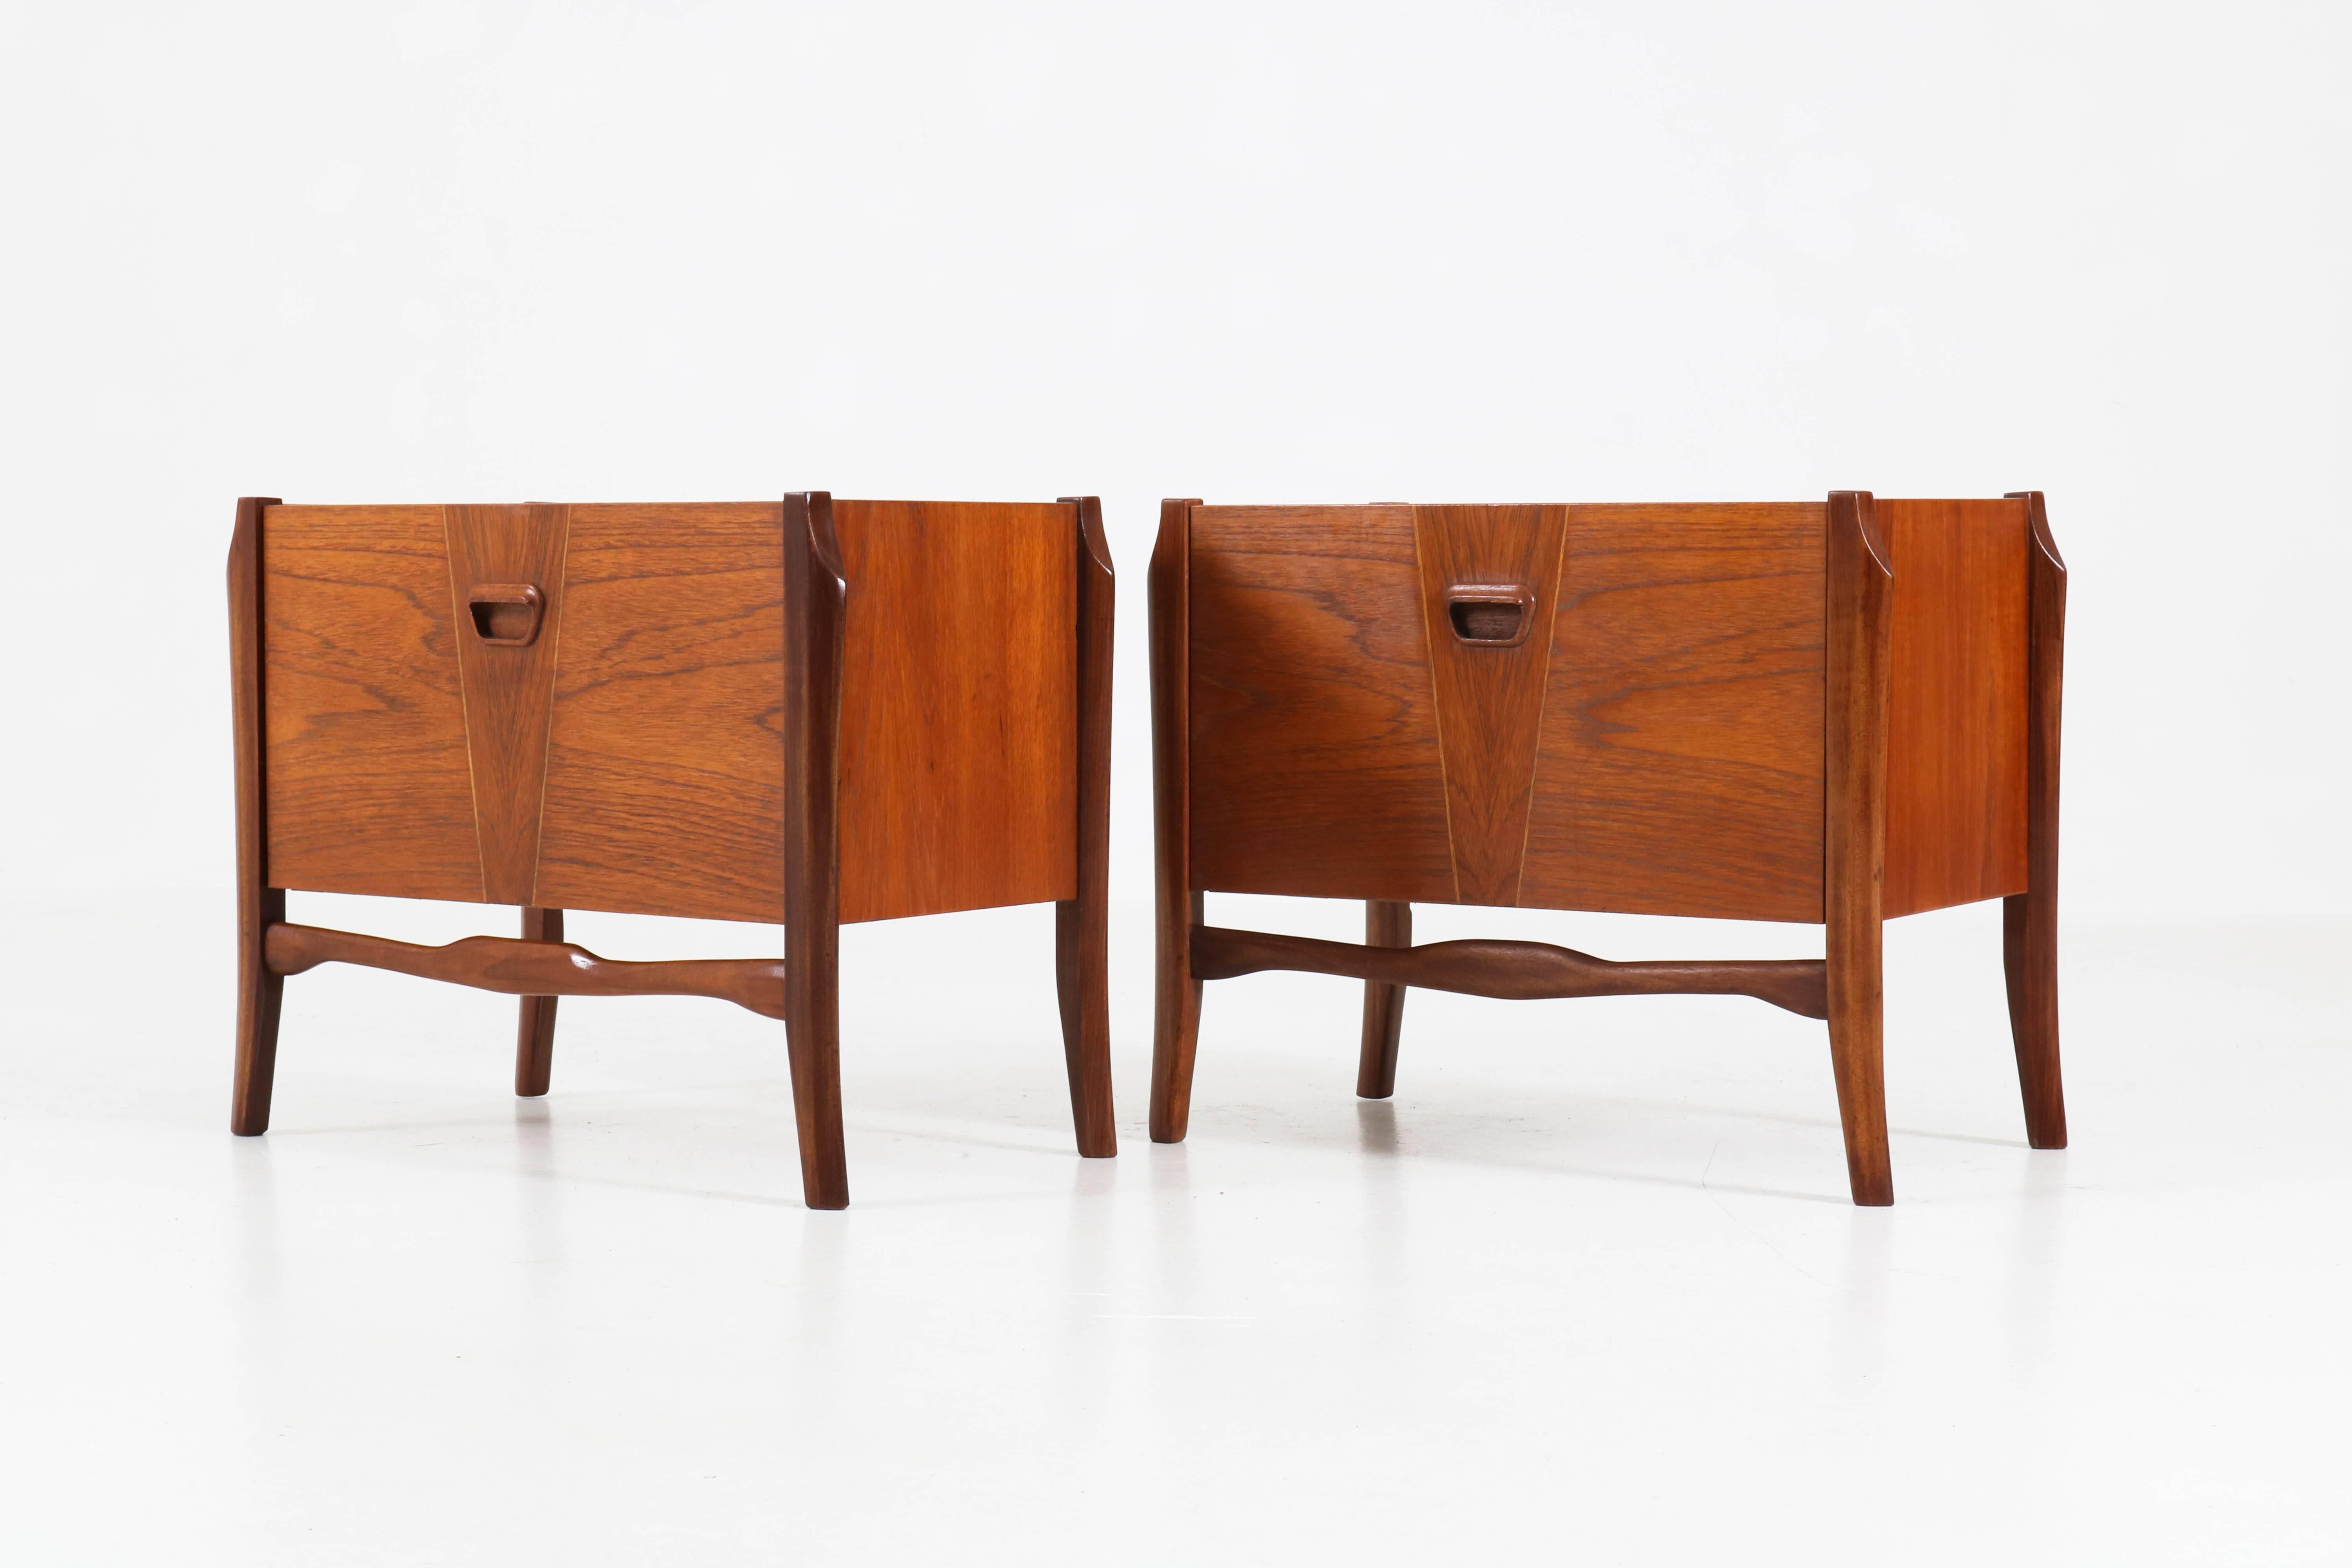 Mid-20th Century Pair of Teak Dutch Mid-Century Modern Bedside Tables or Nightstands, 1960s